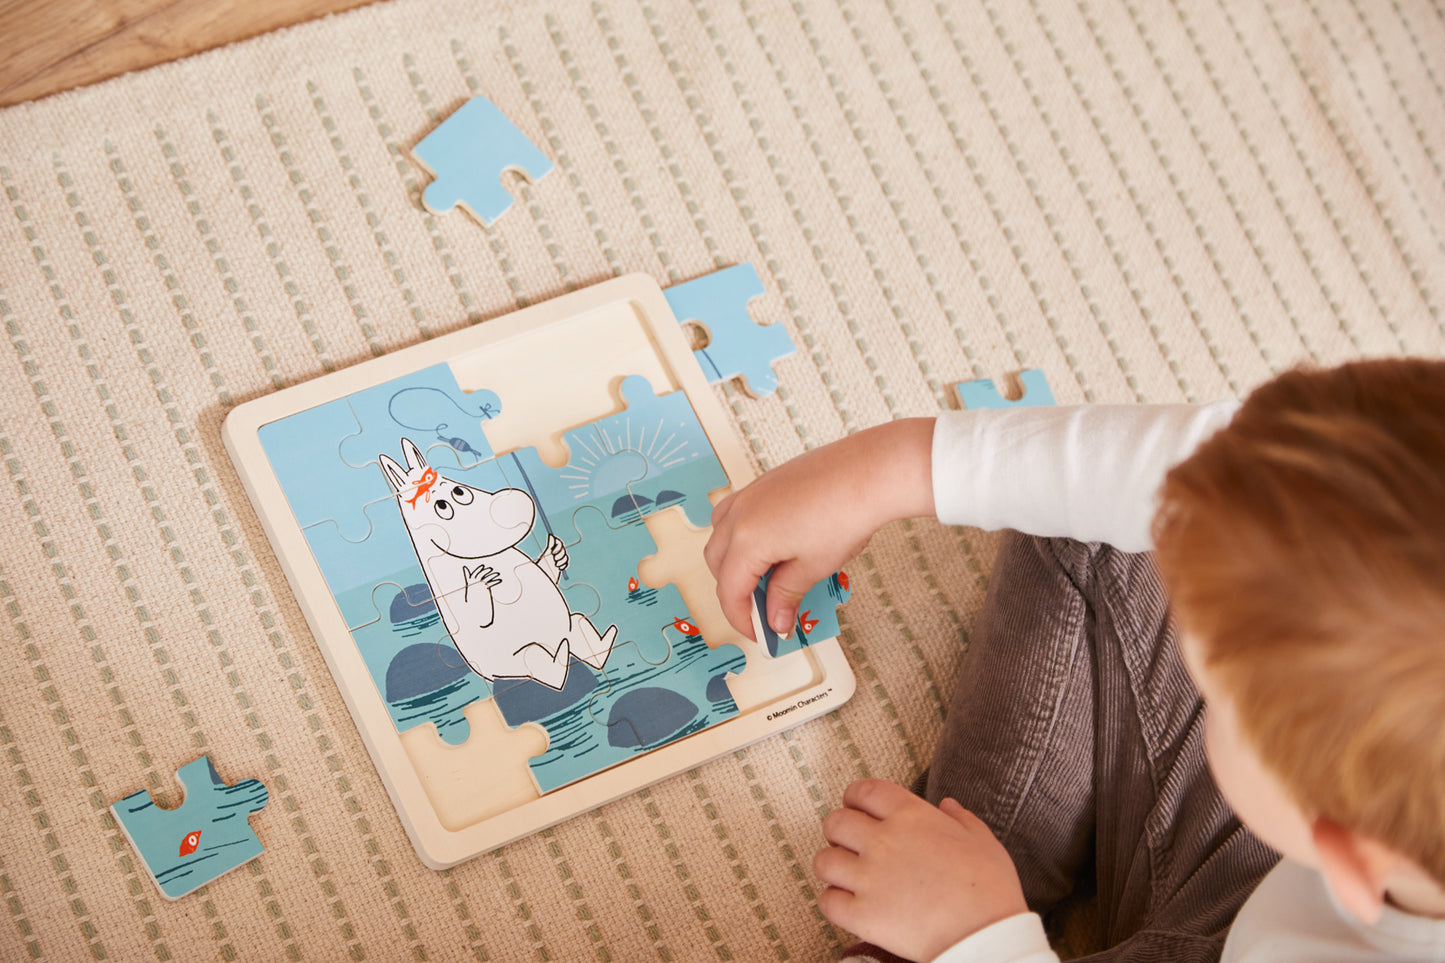 Moomin - Square Wooden Puzzle - Fishing